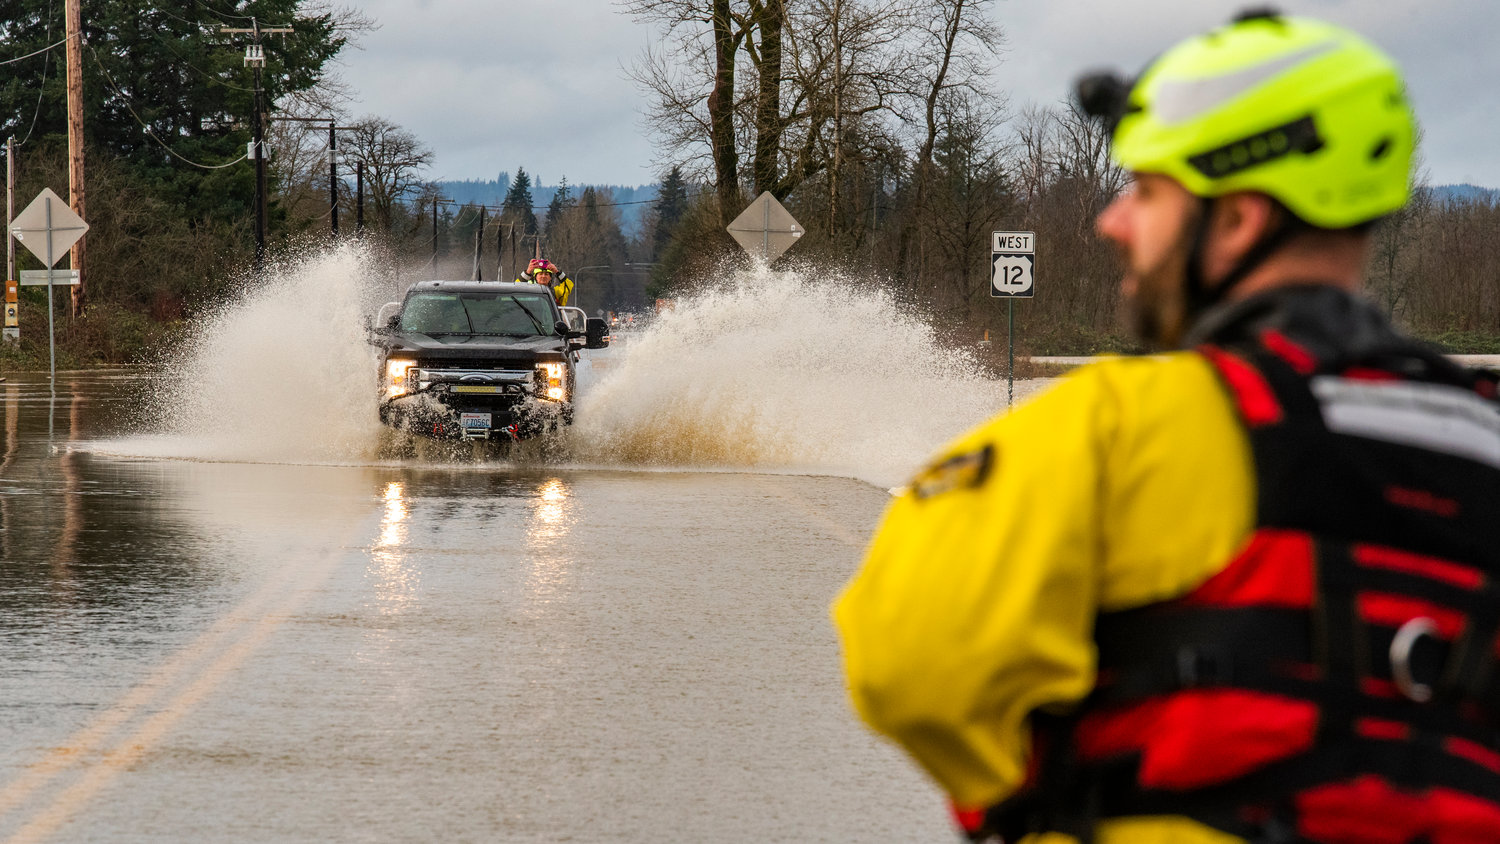 Rescue crews sit on standby at the Moon Road intersection to U.S. Highway 12 in Rochester as a unit transports a crash victim with a head injury across flood waters Saturday afternoon.